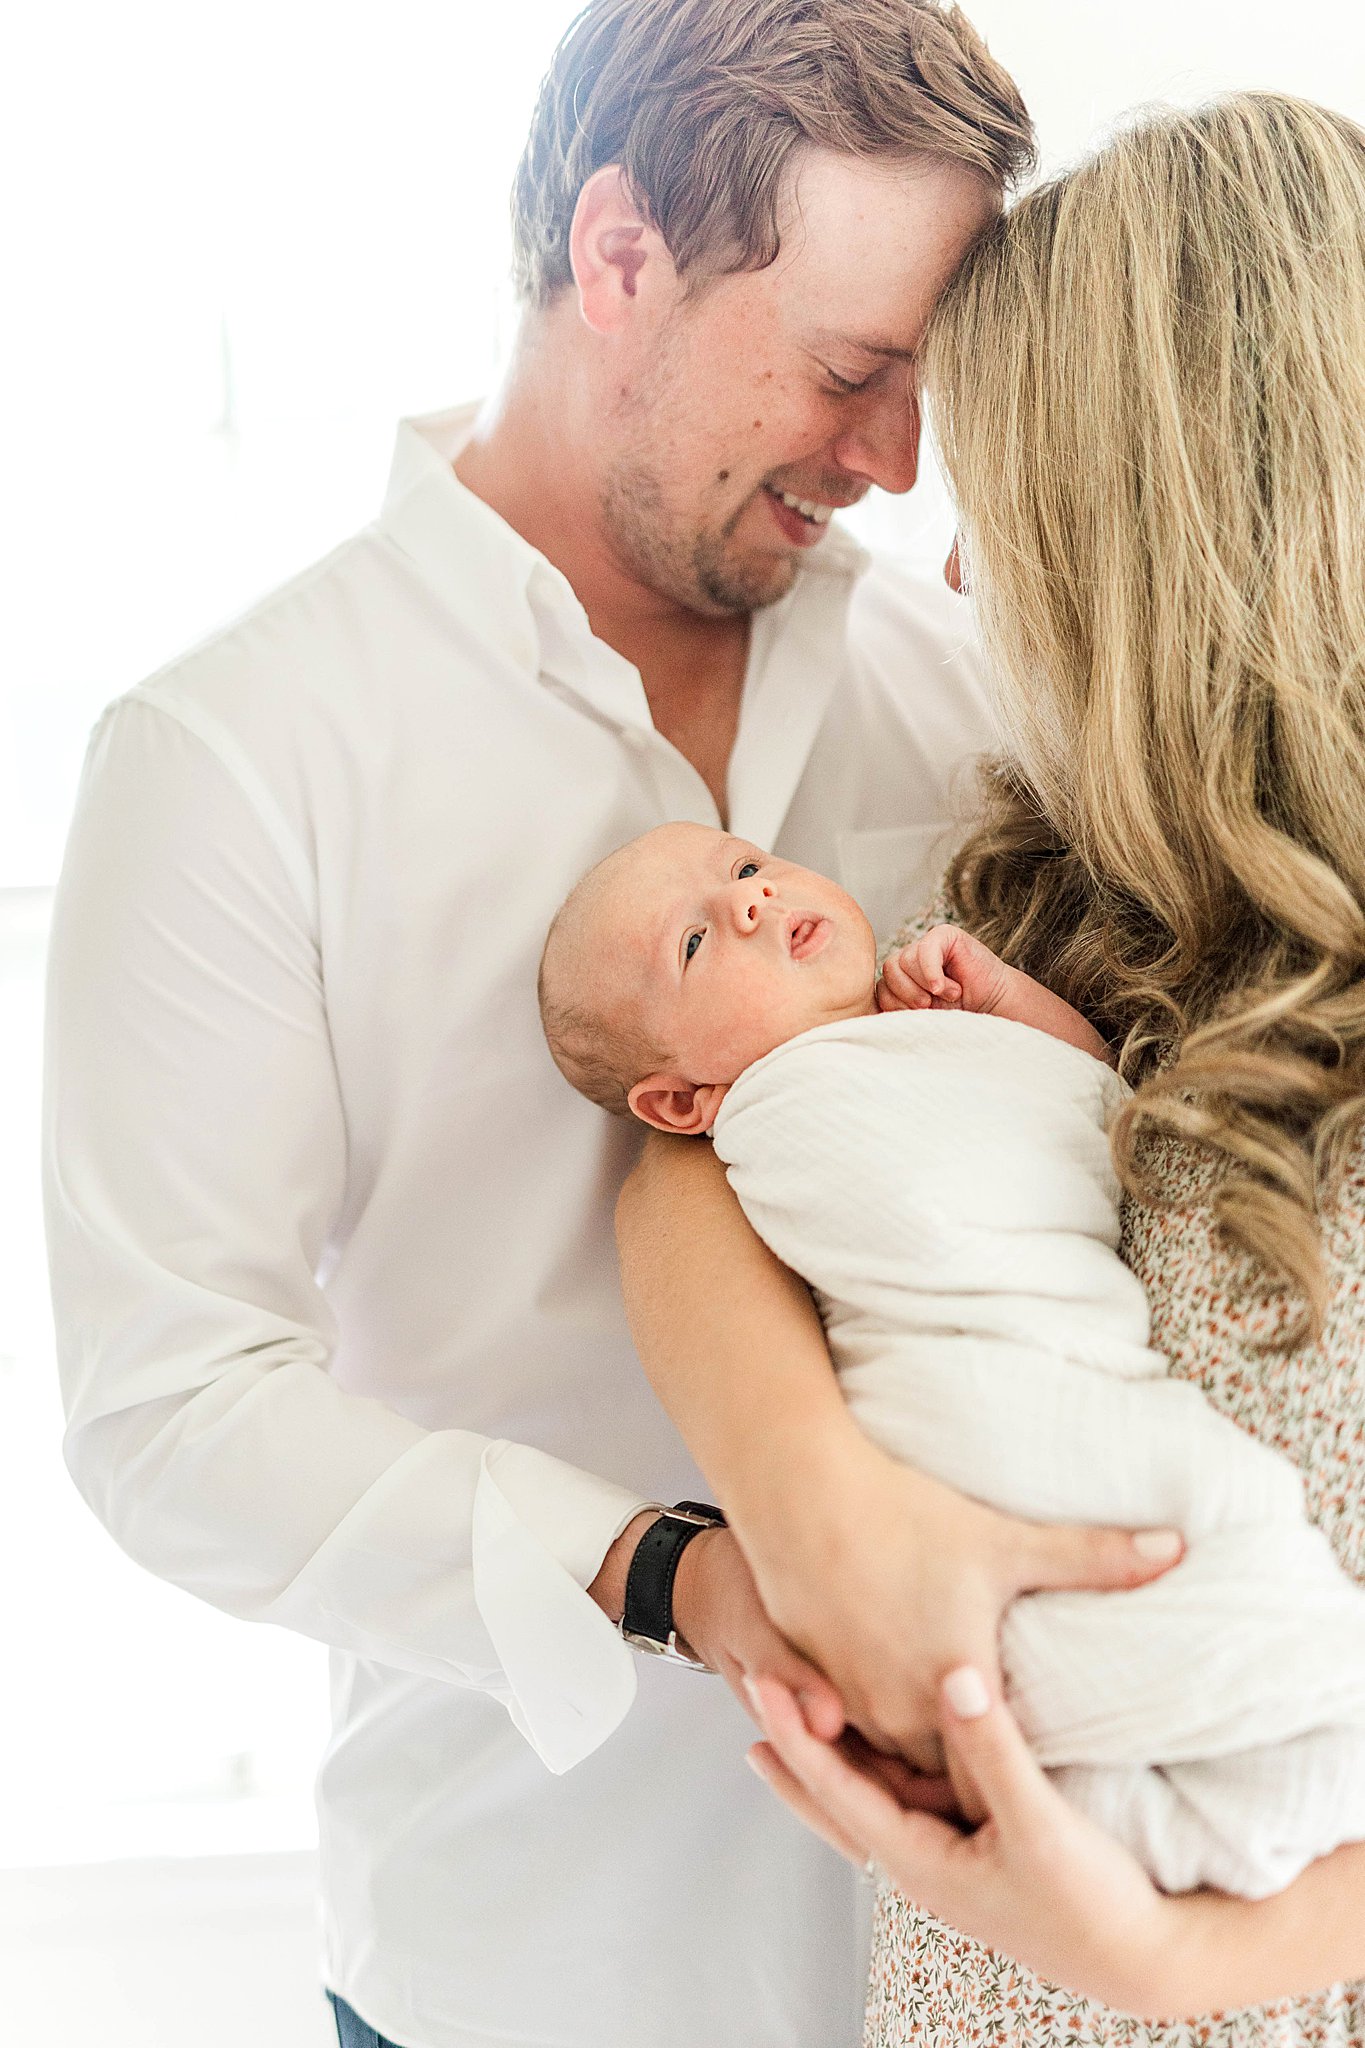 Mom and dad holding baby during MN newborn photographer session.